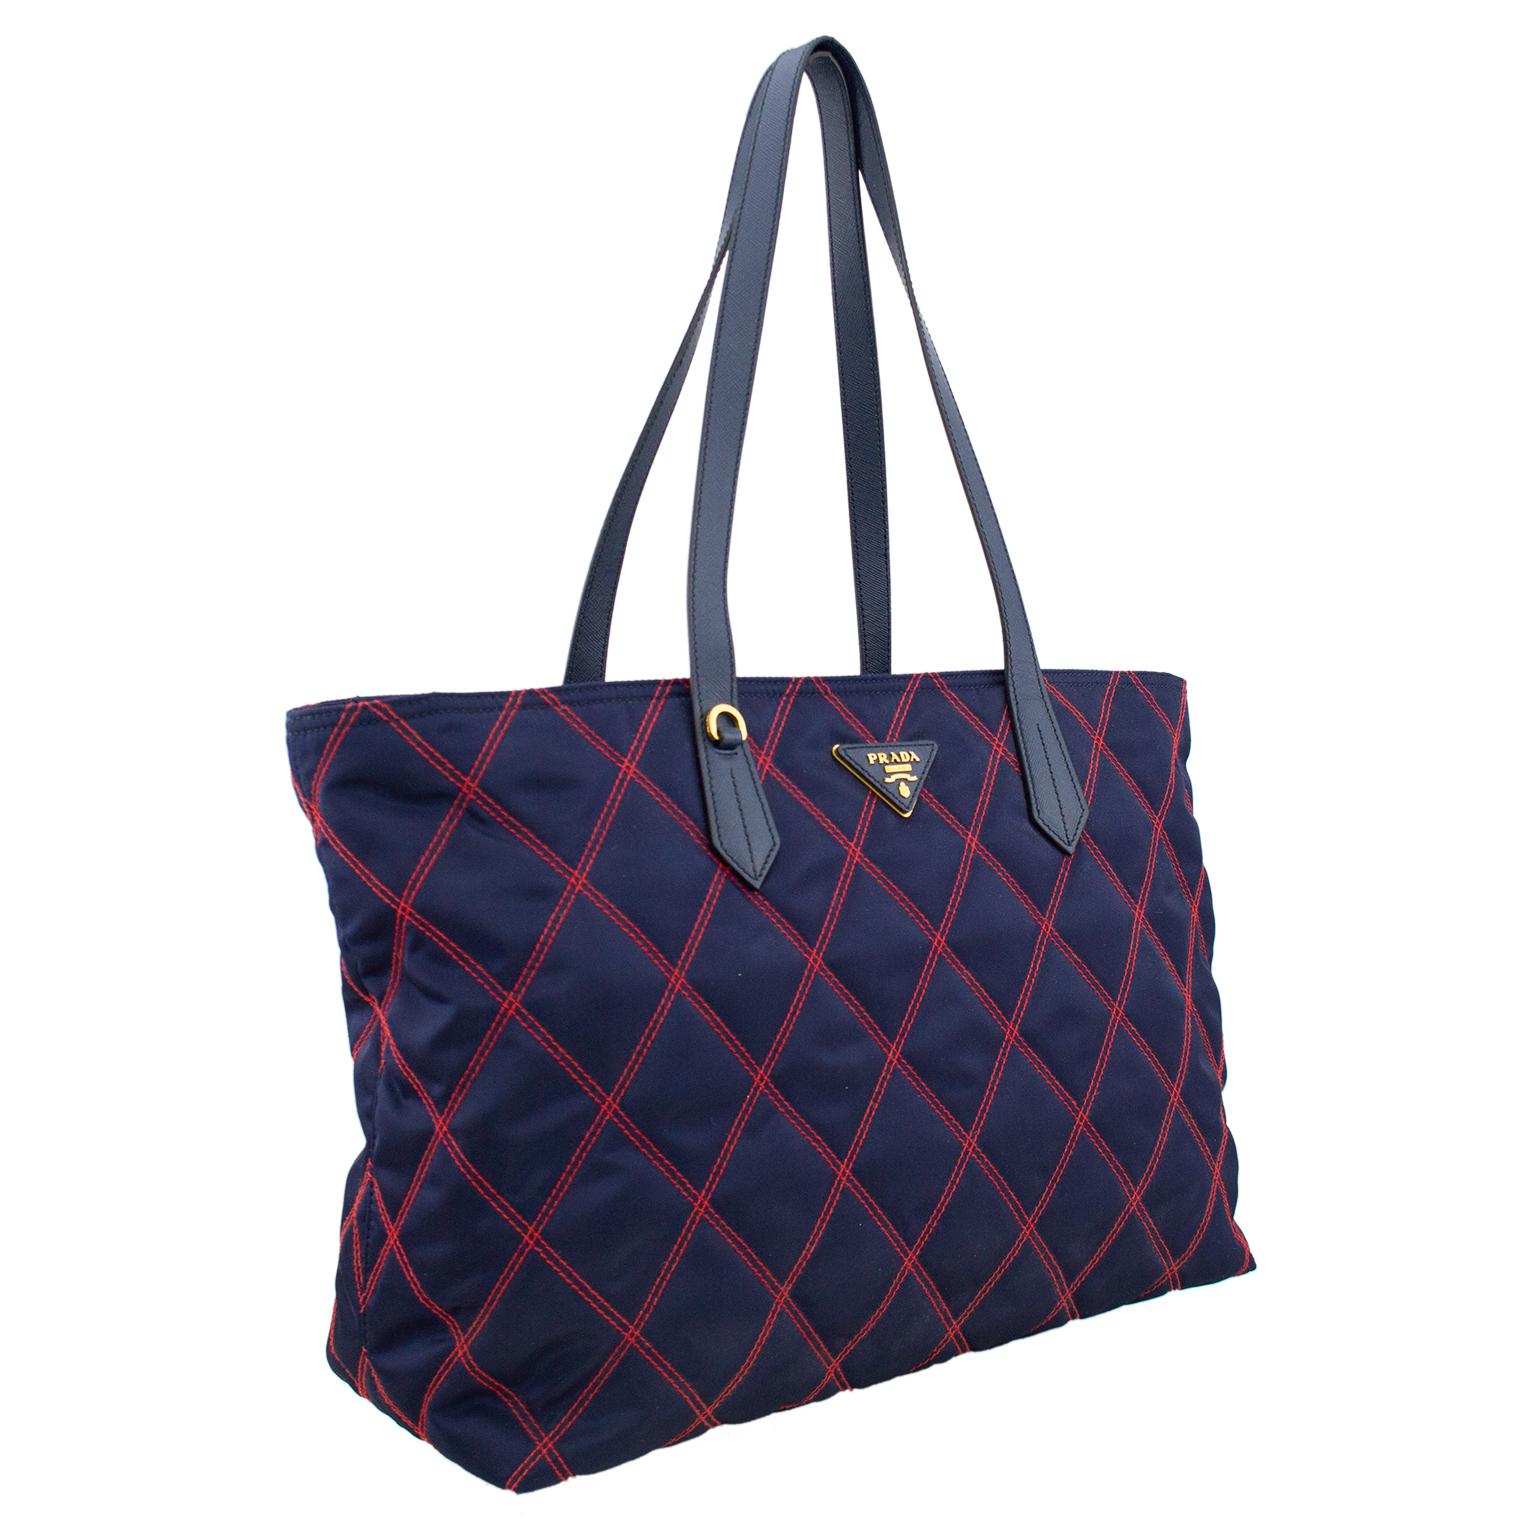 Prada tote bag from the 1990s. Navy blue nylon with red quilted top stitching and triangular Prada logo. Blue leather flat handles that sit comfortably on the shoulder. Prada logo lined interior with two open and one zippered slit pocket. Zipper